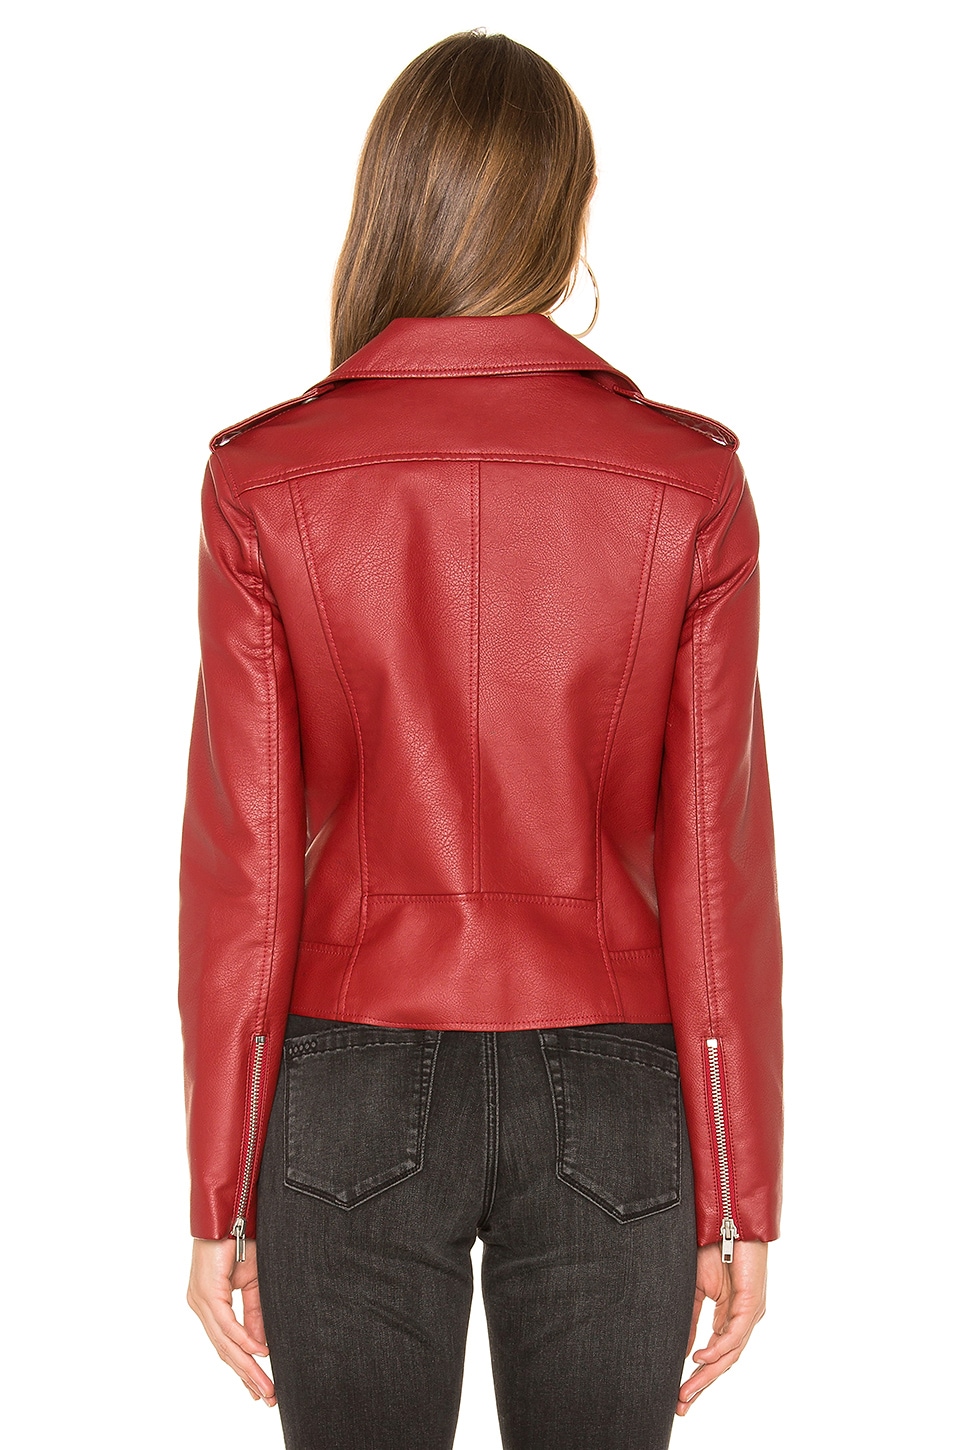 BB Dakota by Steve Madden Just Ride Faux Leather Jacket in Brick Red ...